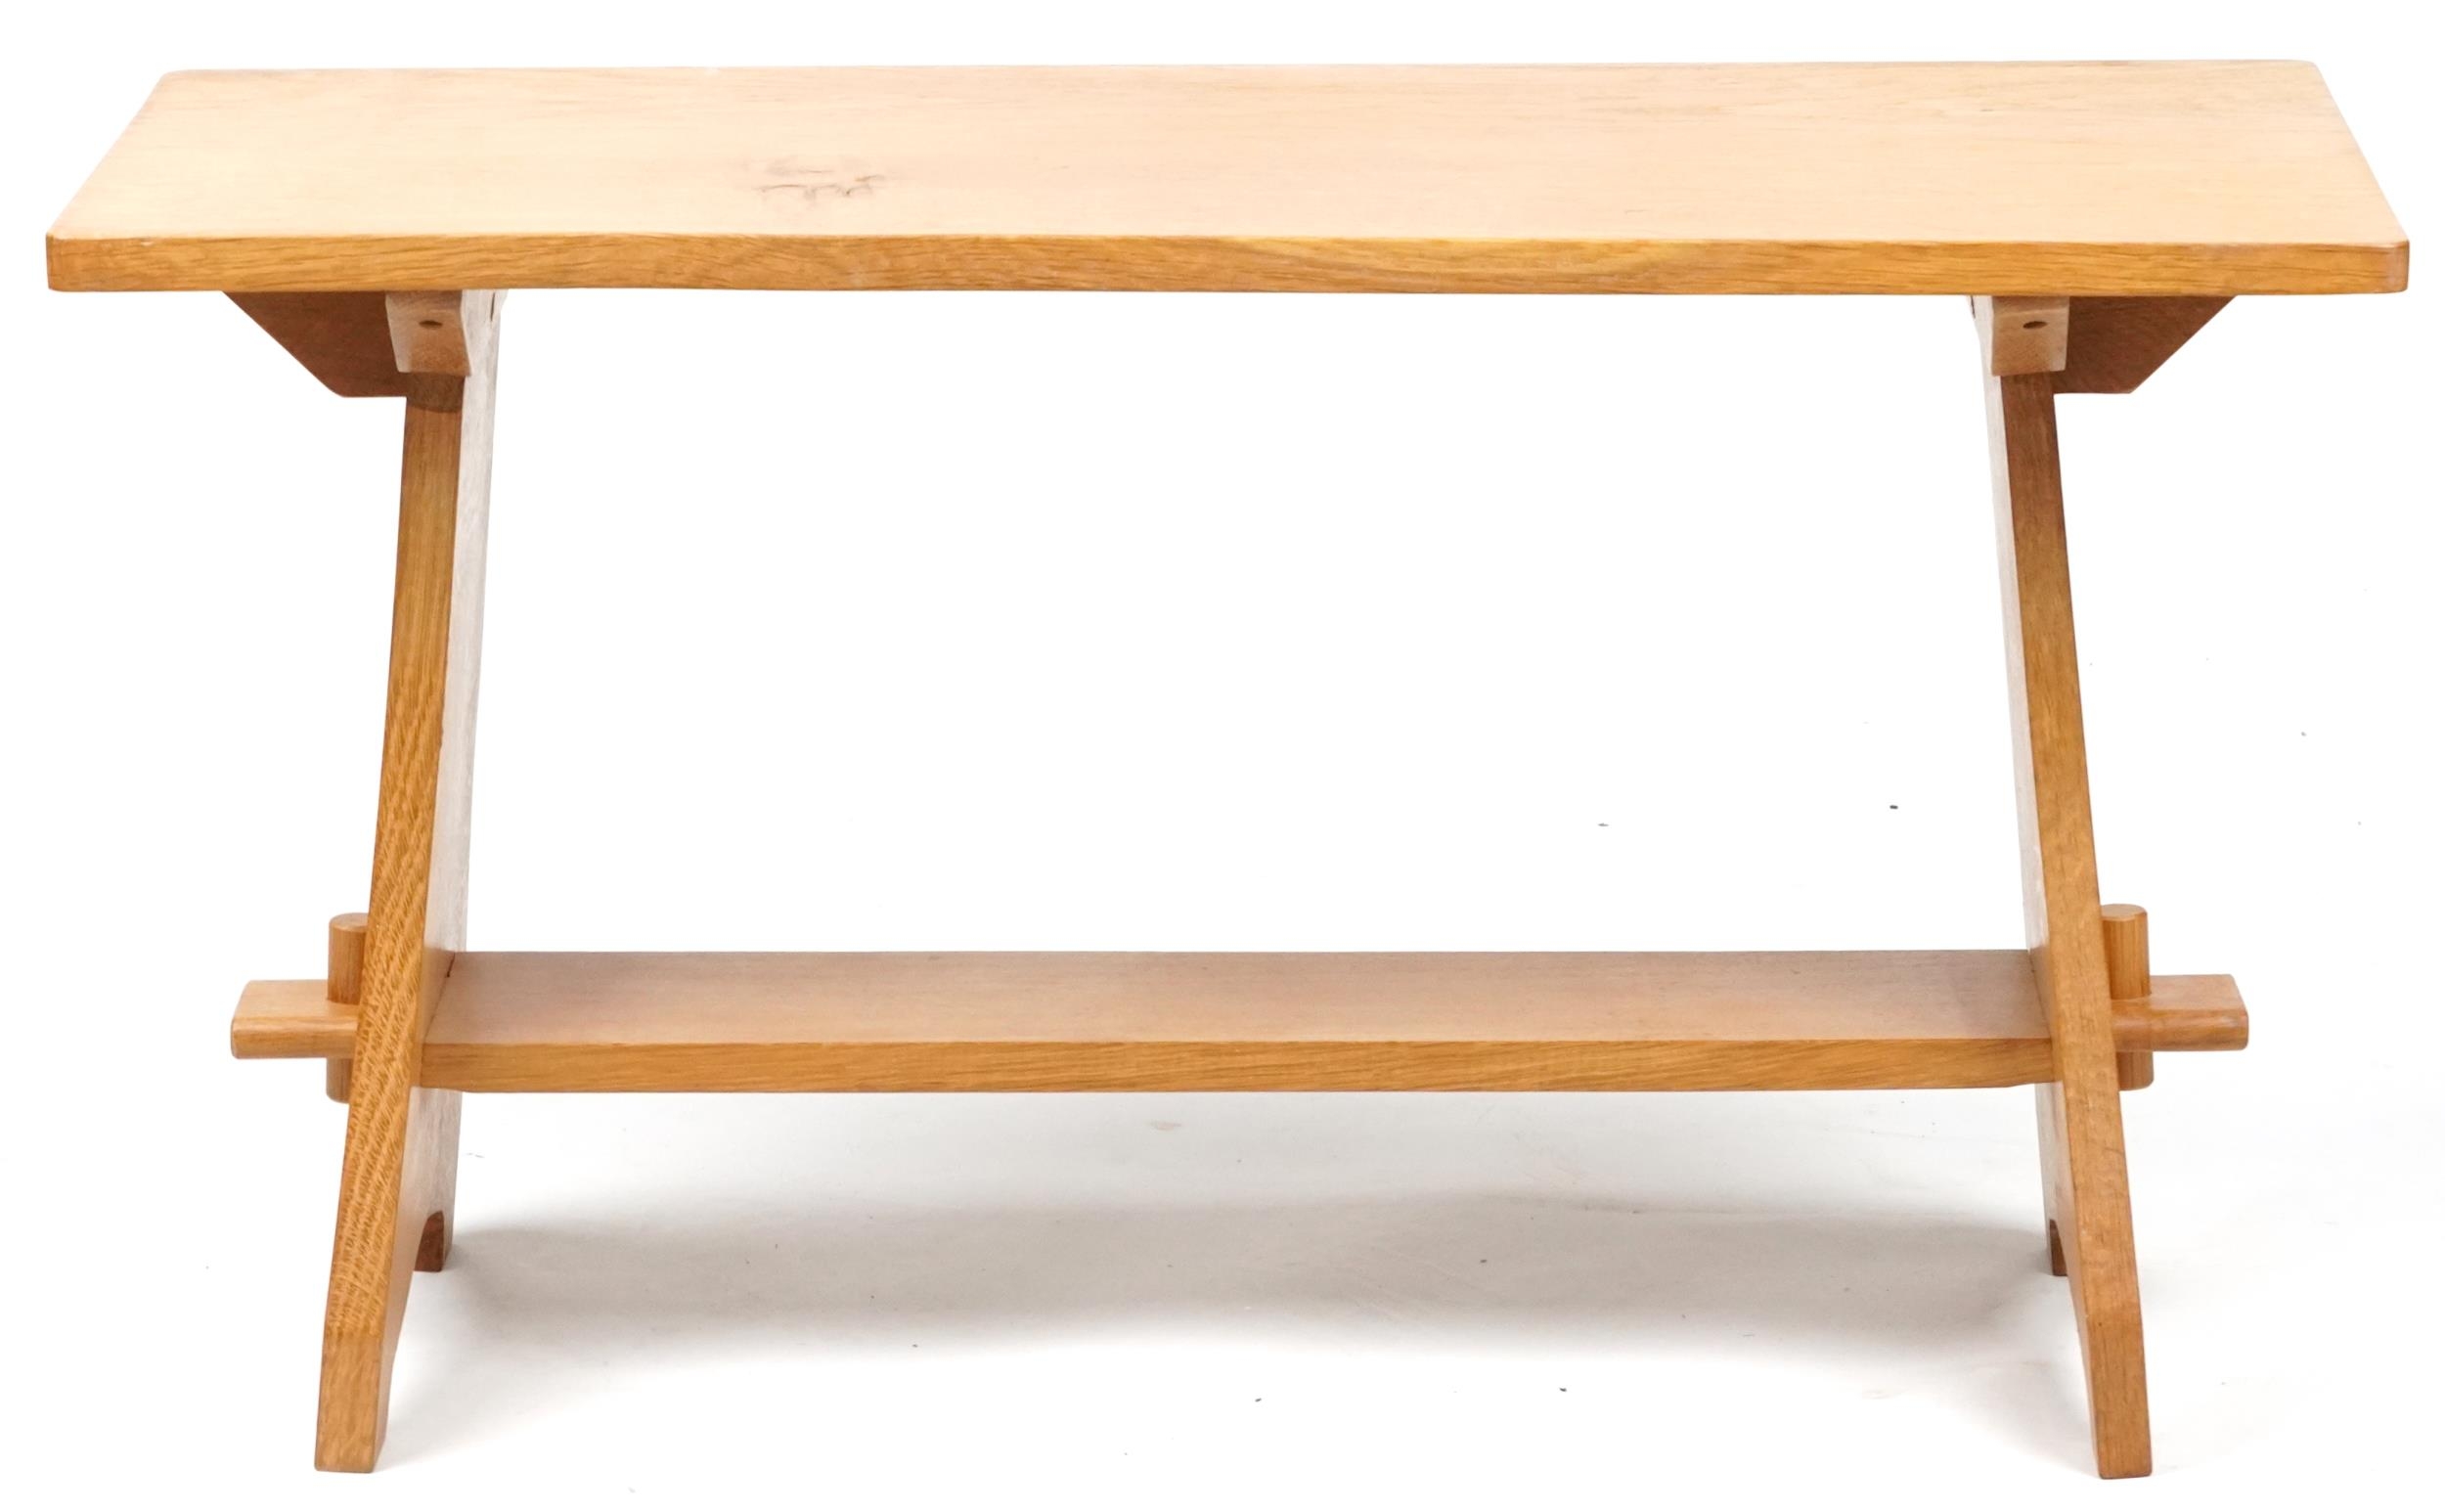 Arts and Crafts style light oak coffee table, 52cm H x 91cm W x 38cm D - Image 4 of 4